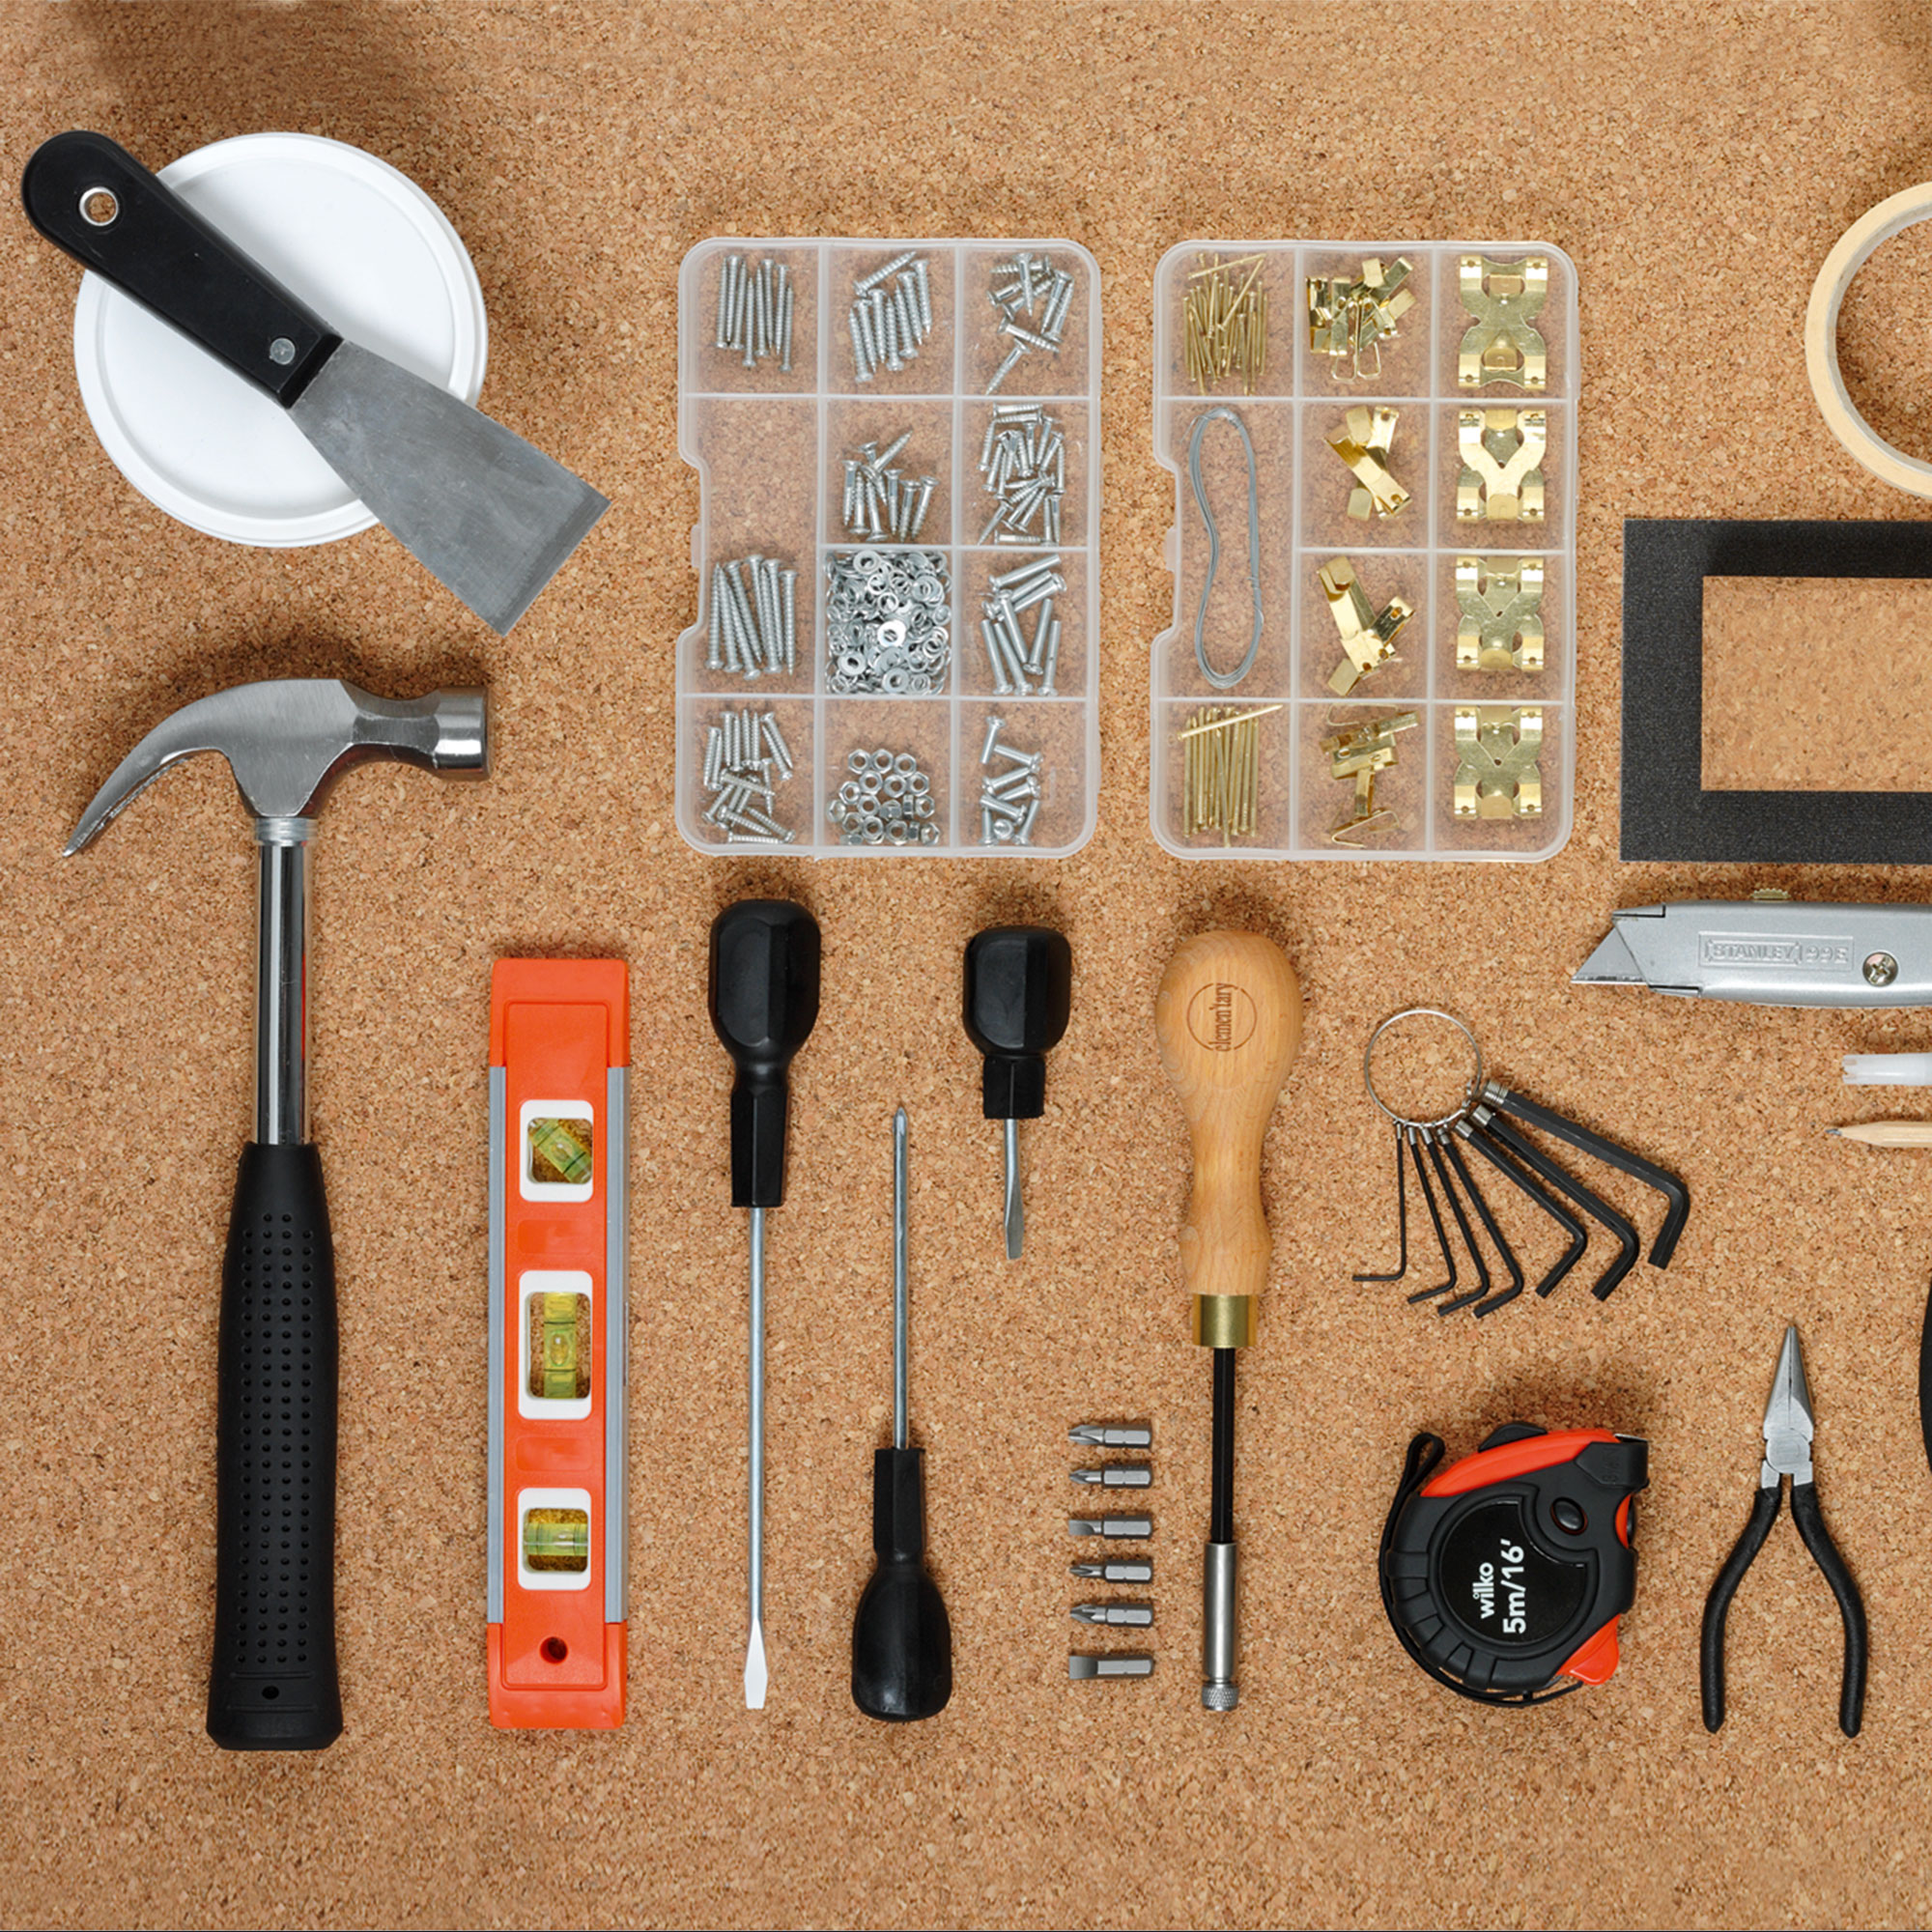 Basic Home Tool Kit List: Make Sure You Have The Essentials